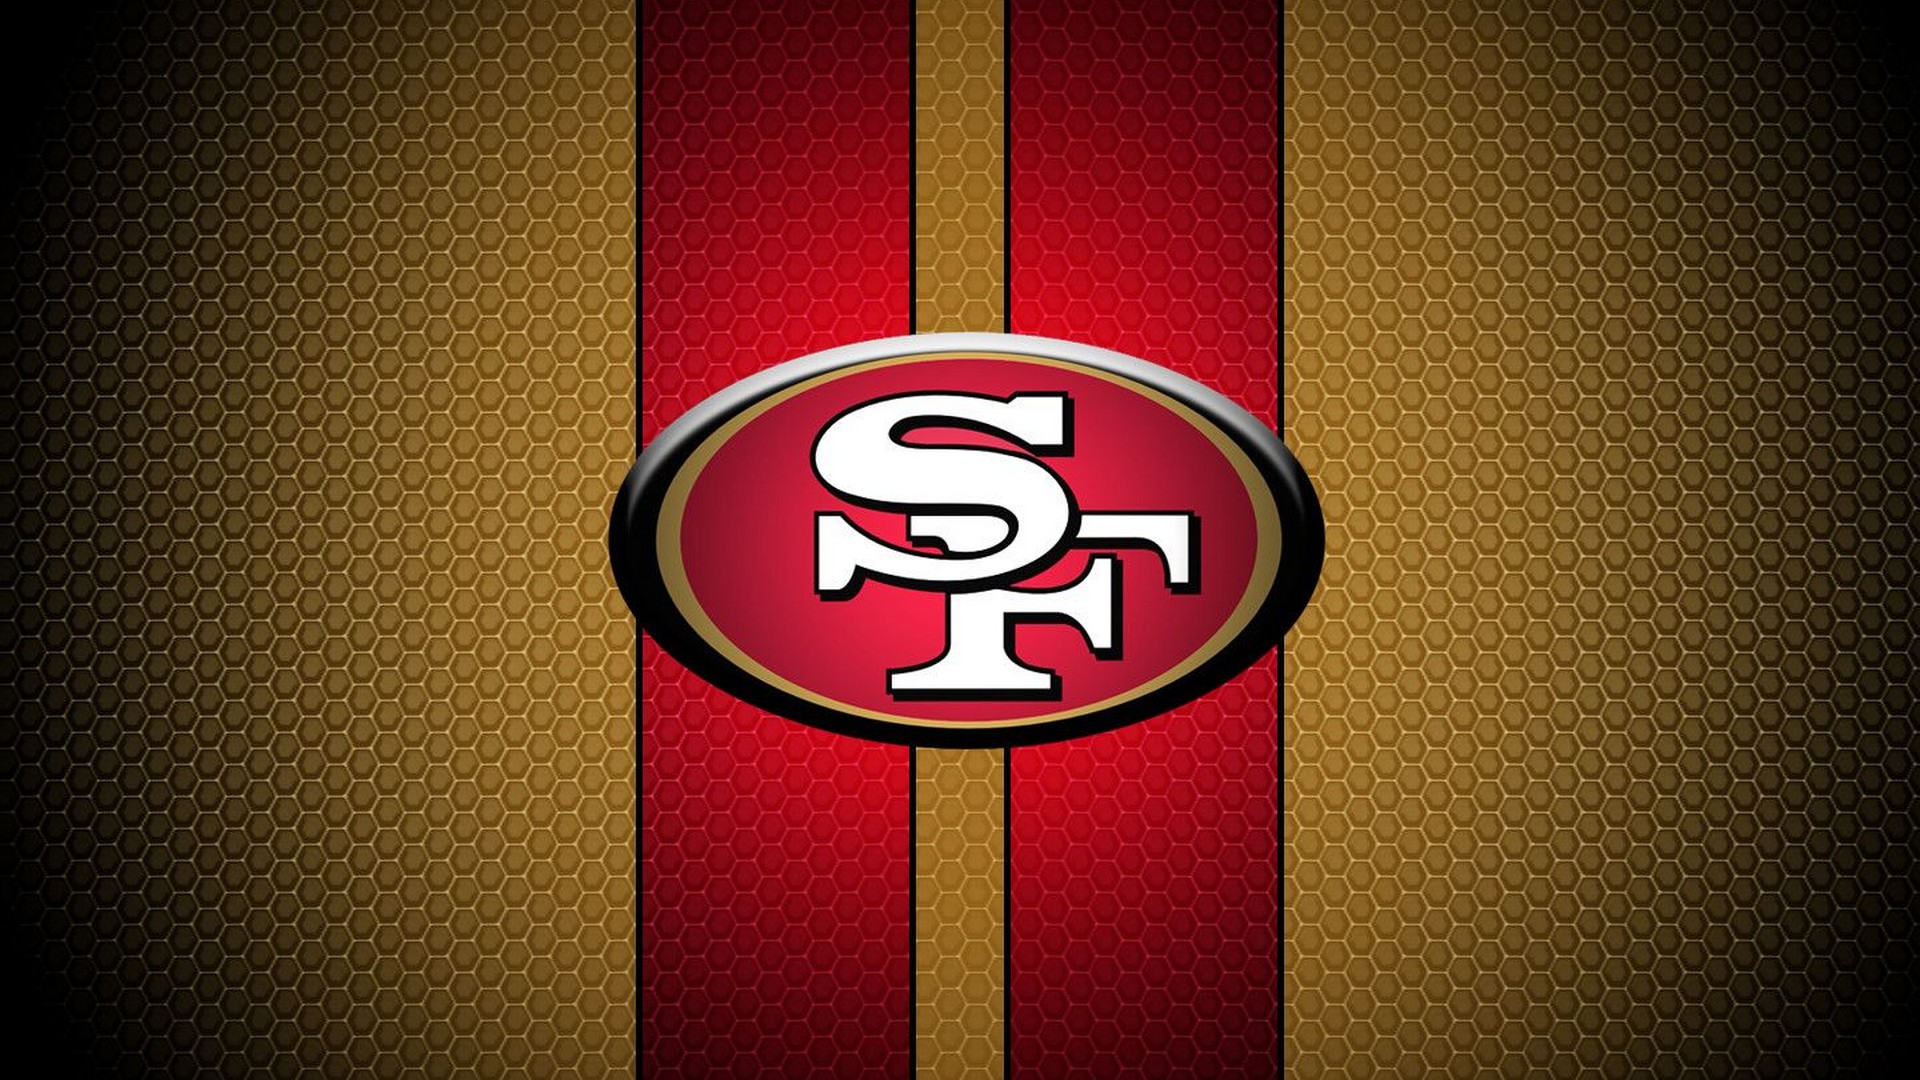 San Francisco 49ers For PC Wallpaper with high-resolution 1920x1080 pixel. You can use this wallpaper for your Mac or Windows Desktop Background, iPhone, Android or Tablet and another Smartphone device